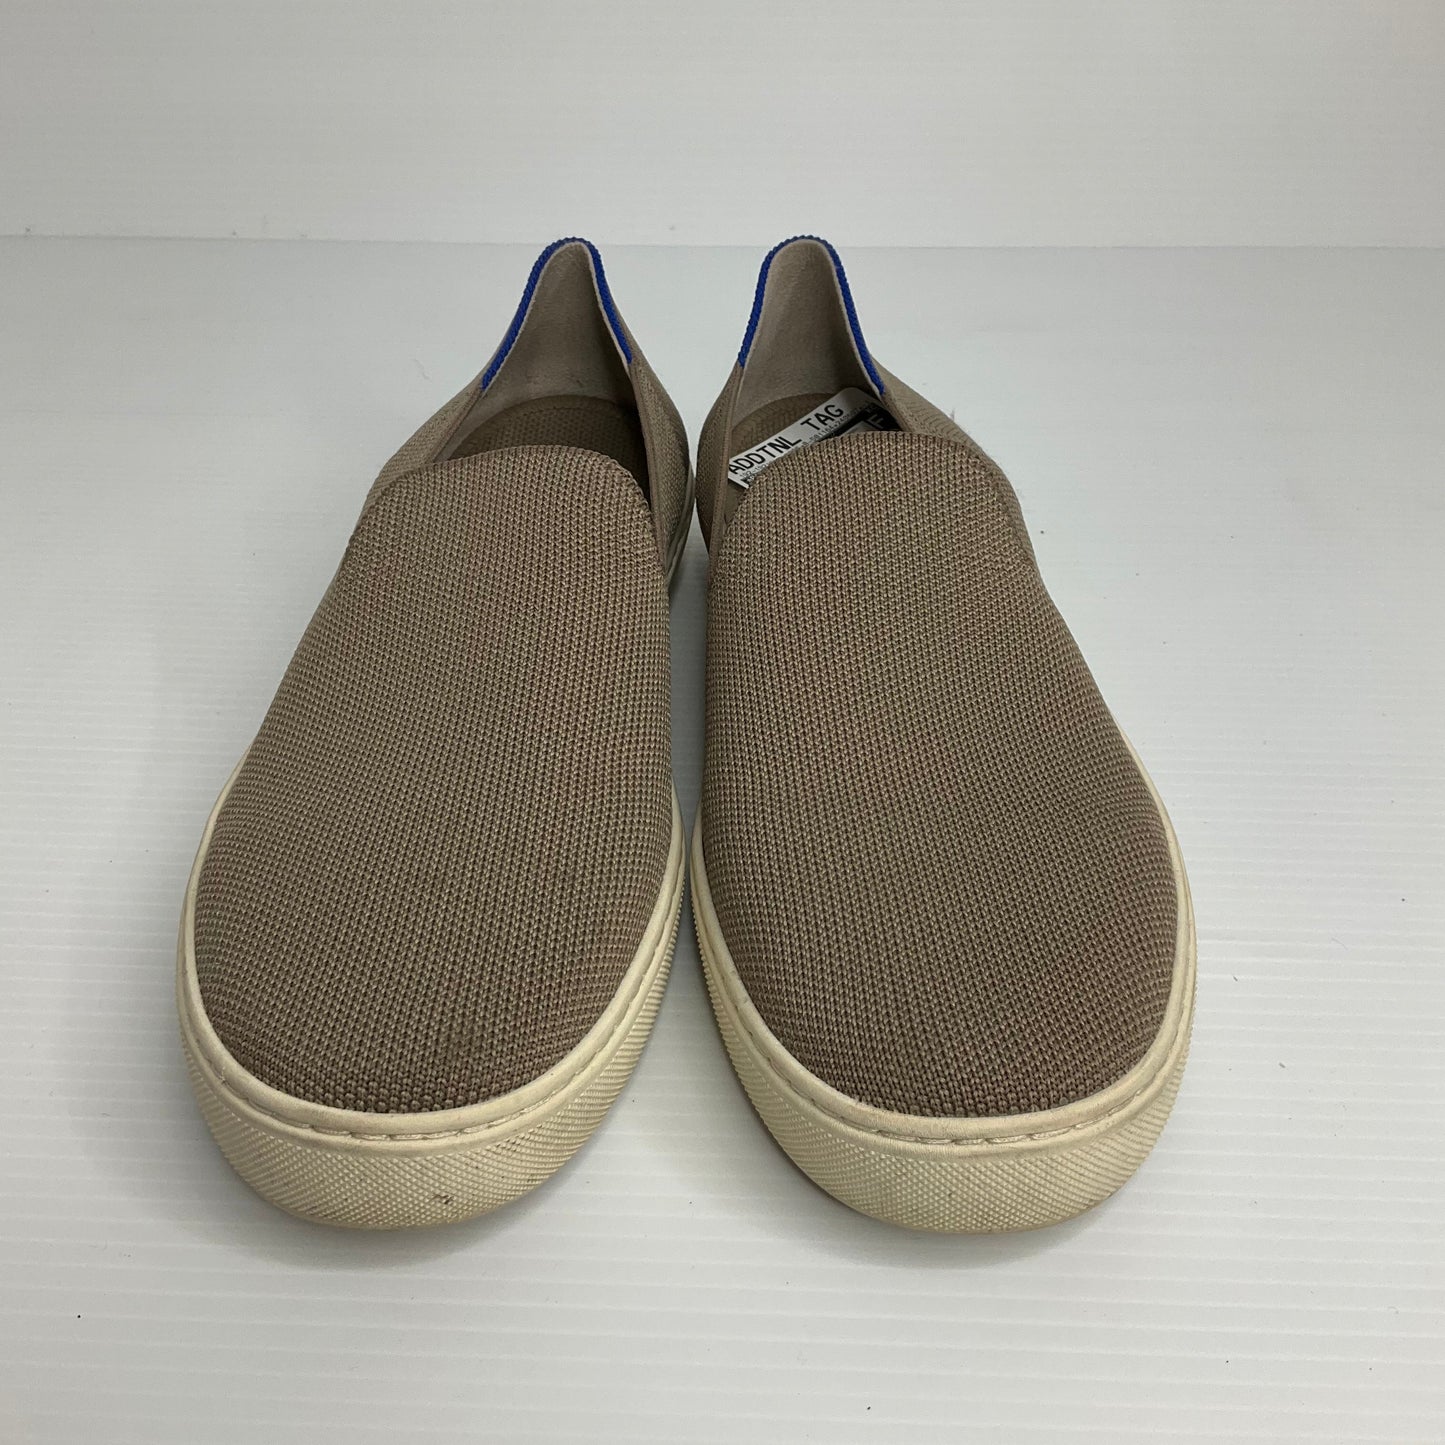 Tan Shoes Sneakers Rothys, Size 10